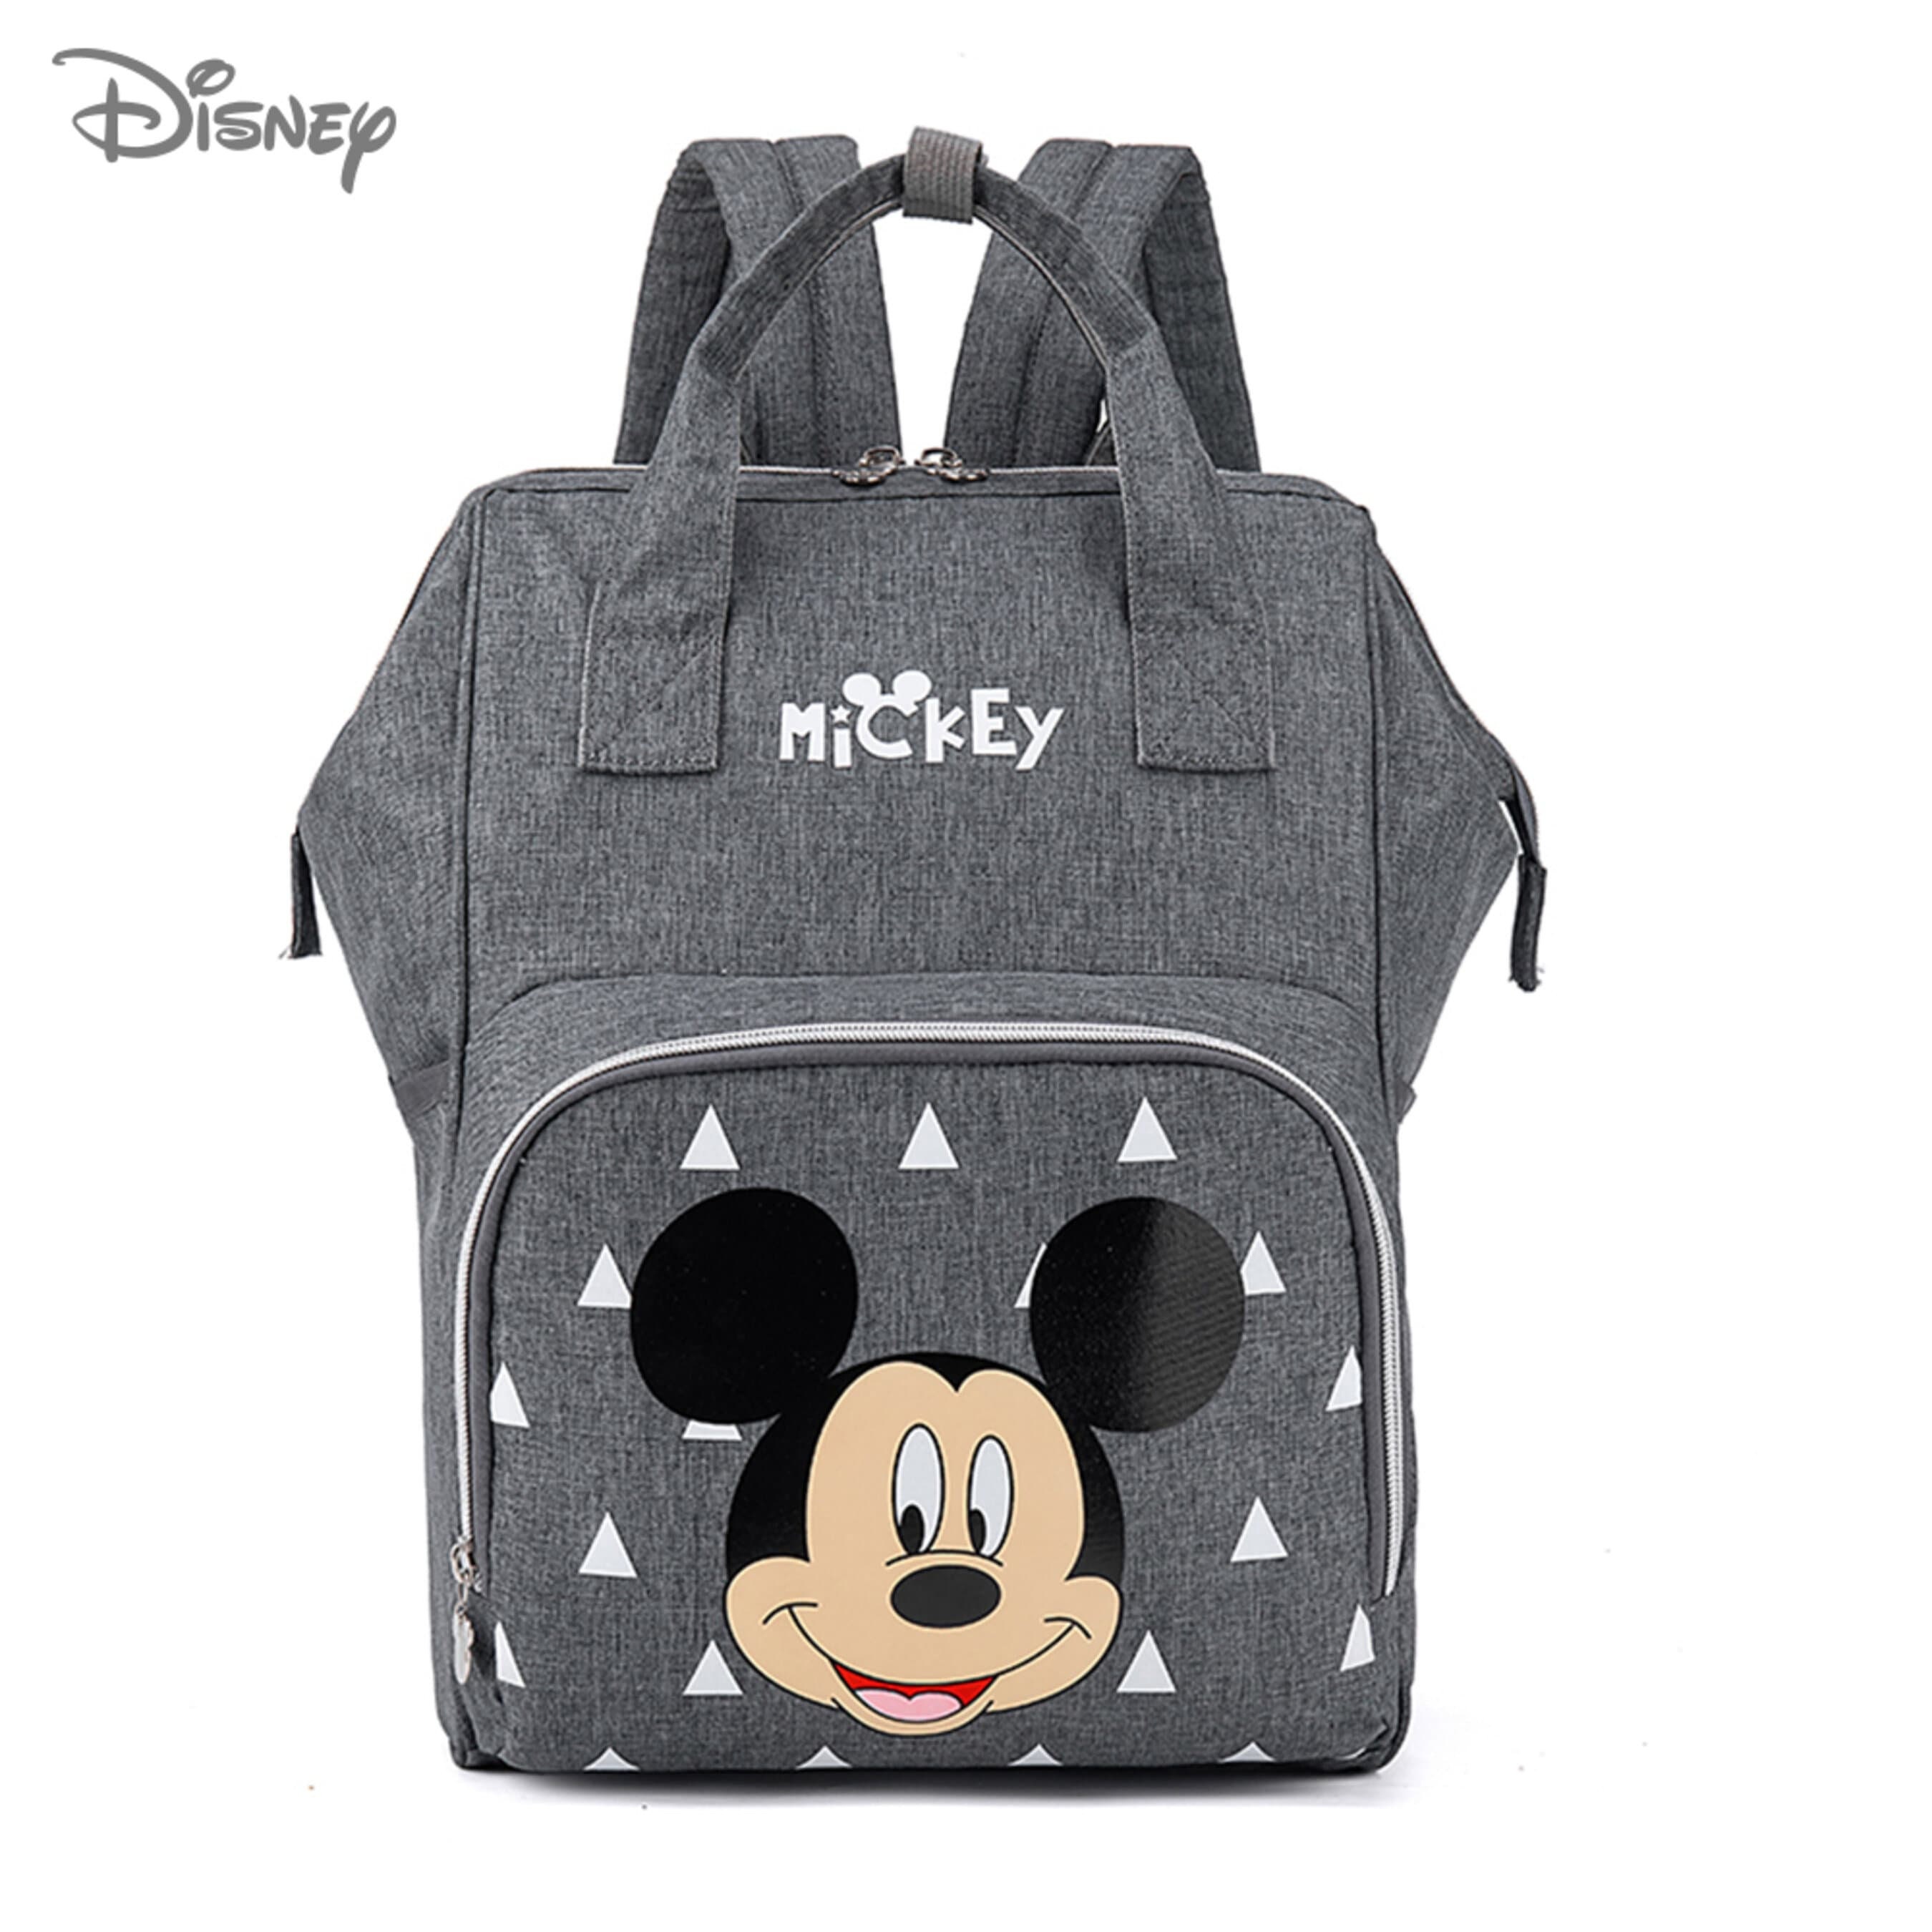  Lmbabter Baby Stroller Storage Bag Diaper Bag Infant Carriages  Diaper Organizer Pouches Reusable Embroidered Mommy Bag for Outdoor : Baby